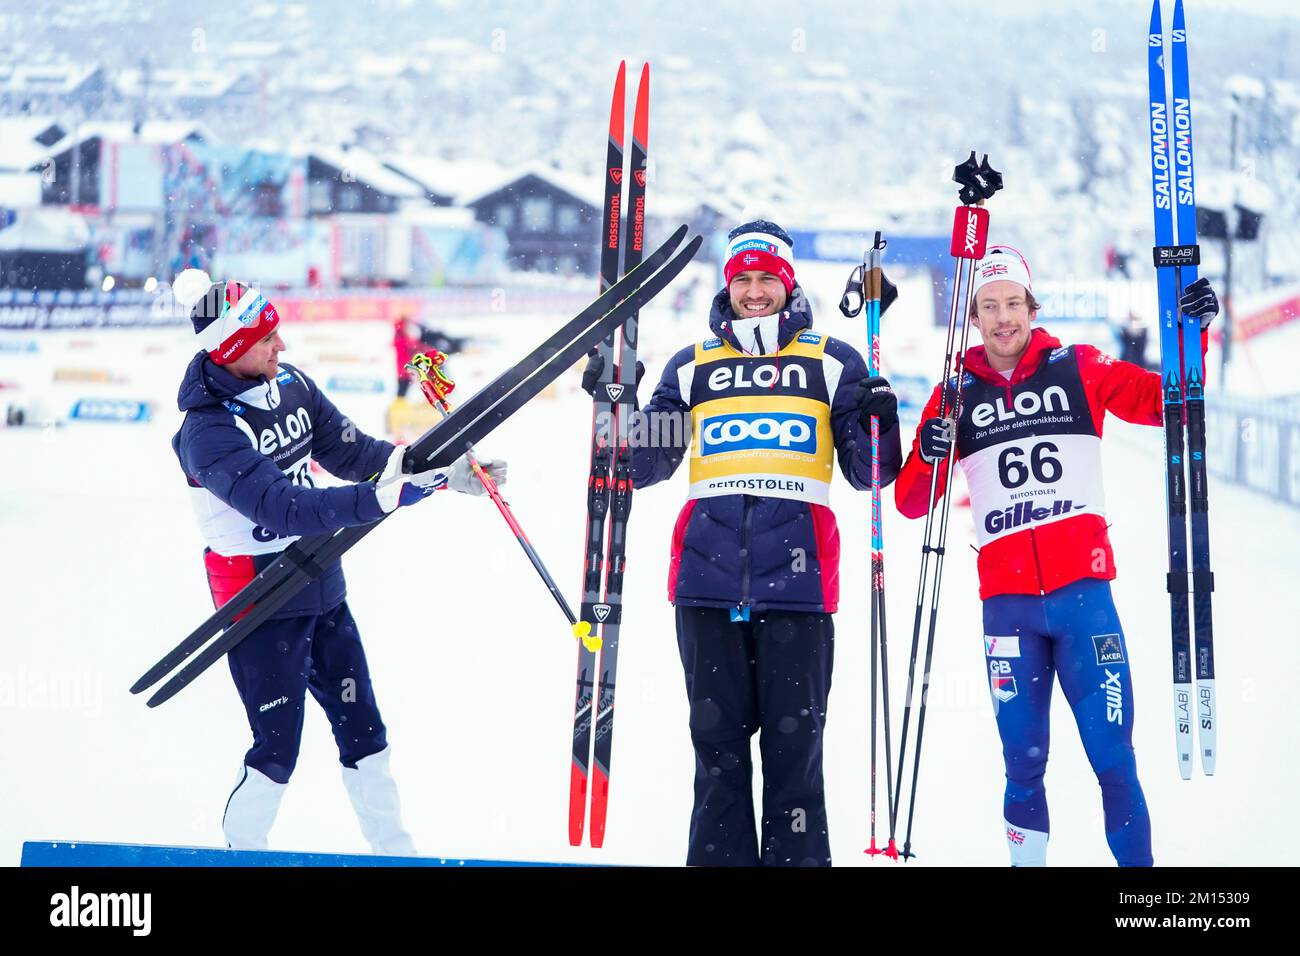 Beitostølen 20221210.Paal Golberg won the men's 10 km in the World Cup in cross-country skiing at Beitostoelen on Saturday. Anrew Musgrave came third and Didrik Toenseth came second Photo: Terje Pedersen / NTB Stock Photo